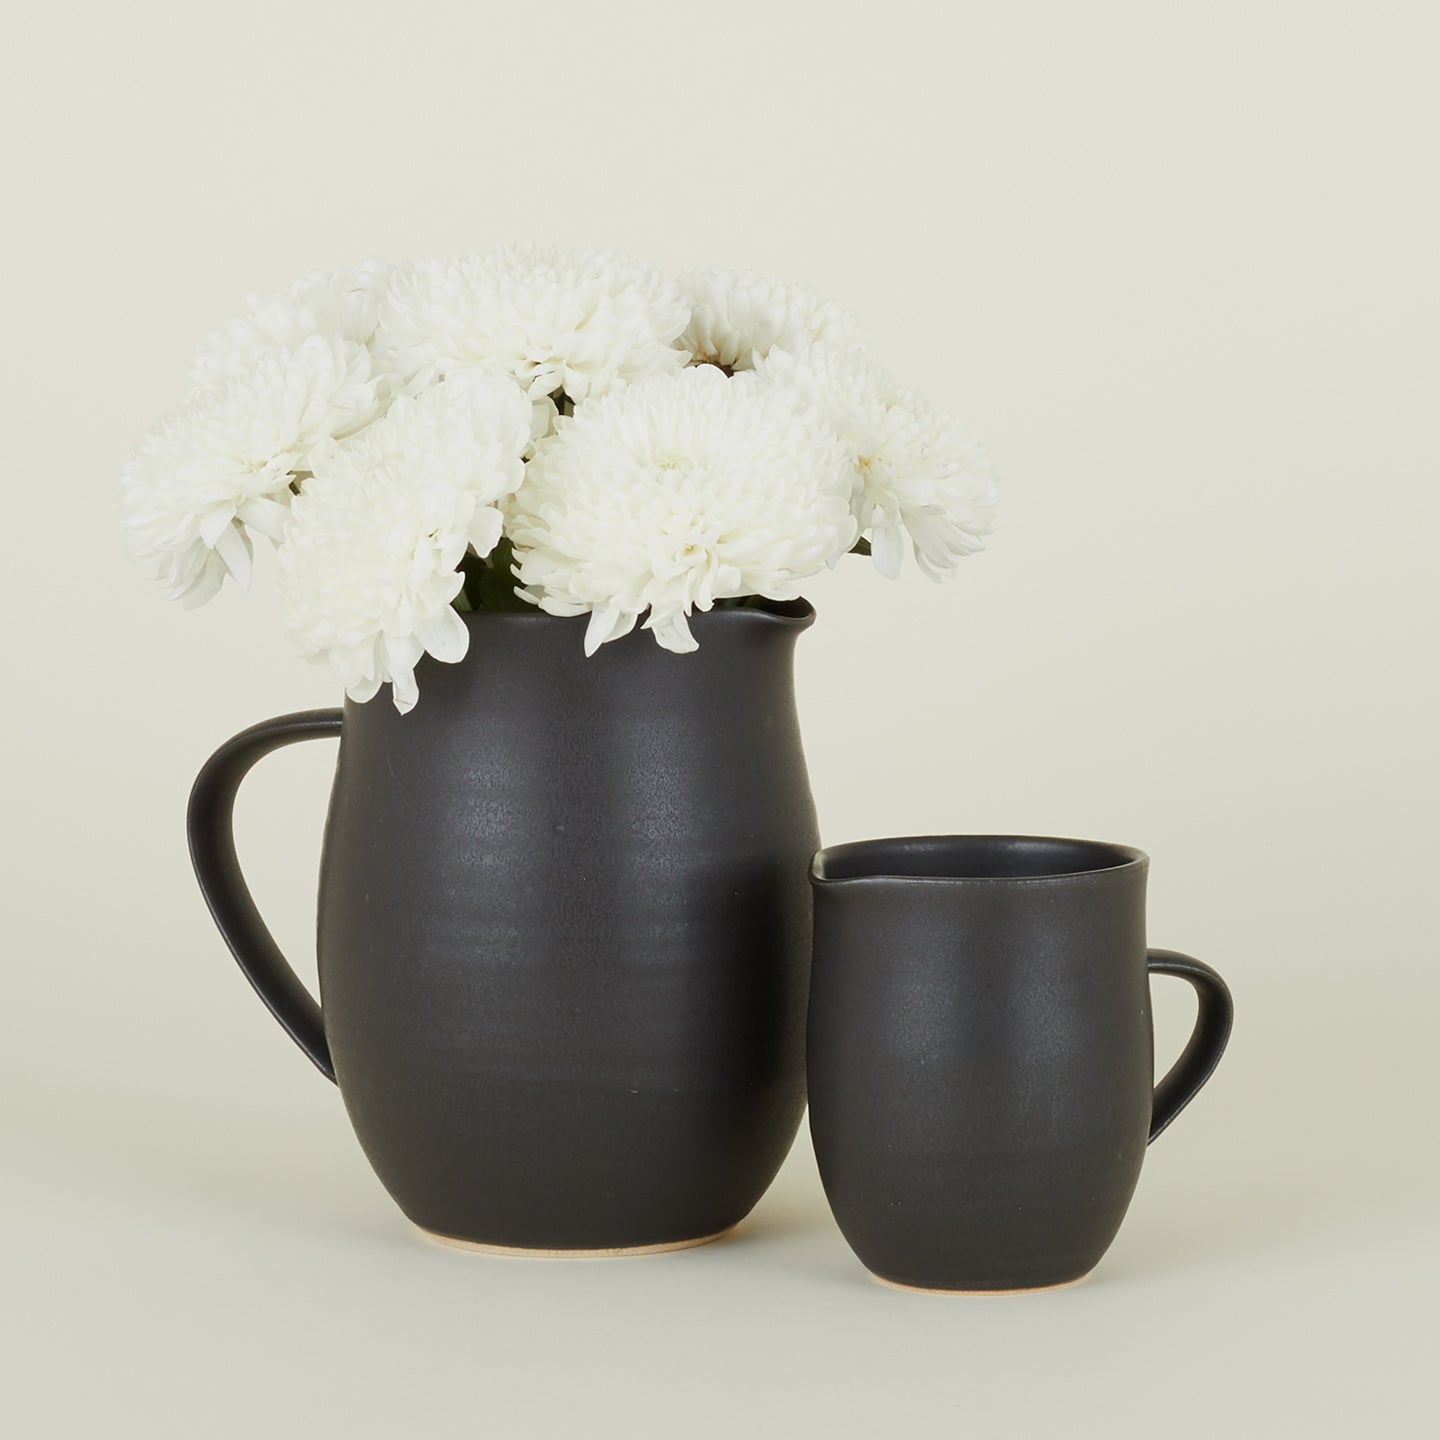 Stoneware Creamer and Stoneware Pitcher in Black with flowers.